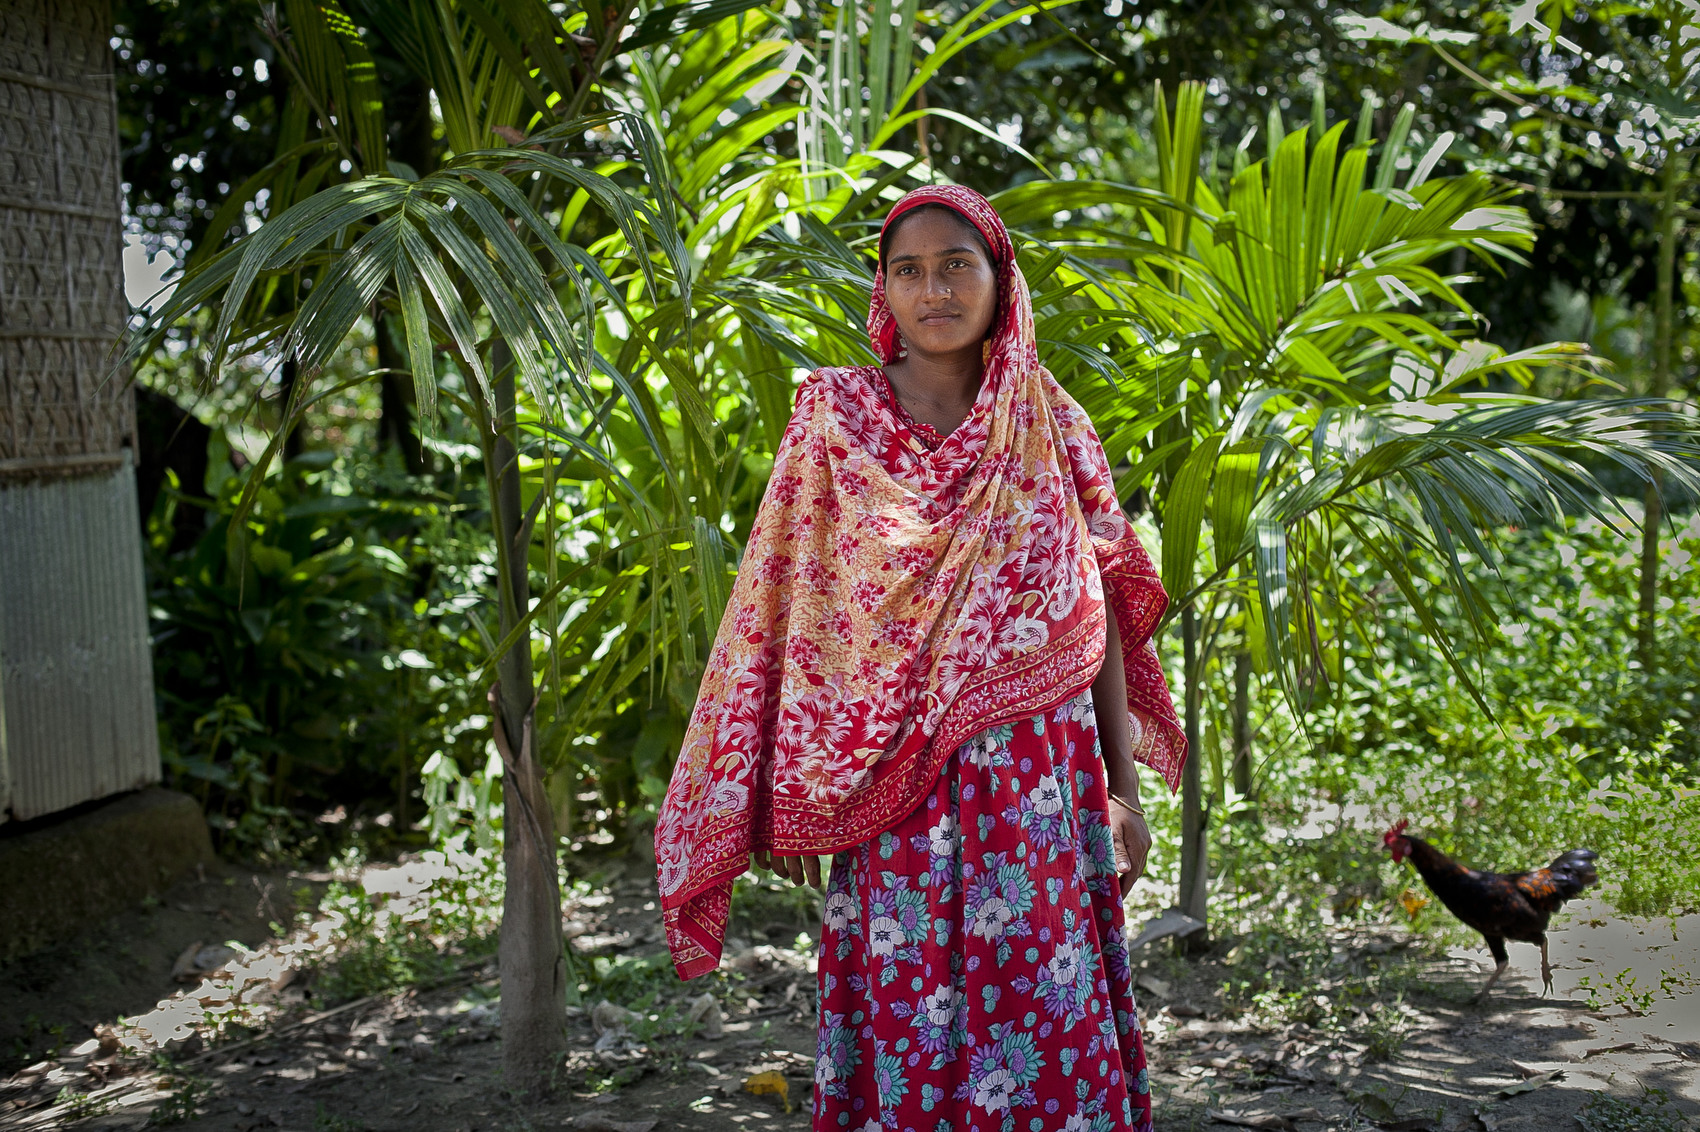 LALMONIRHAT DISTRICT, BANGLADESH - JULY 9: Bash Kata Indian enclave resident, Musamat Lipi, stands for a photo after choosing Bangladeshi citizenship with the Enclaves Exchange Coordination Committee July 9, 2015 in Lalmonirhat District, Bangladesh. Lipi says that she is happy her son can go to school legally, now that they have citizenship. The India–Bangladesh enclaves, also known as the chitmahals, are 162 parcels of land, each of which happens to lie on the wrong side of the India/Bangladesh border. There are 111 such Indian enclaves in Bangladesh and 51 Bangladeshi enclaves in India. On June 6th Bangladesh and India came to an agreement to let residents choose which country they want to belong to, and on July 31st these enclaves will dissolve into the country already surrounding them. For decades, these people have been stateless. Both the Bangladesh and Indian governments have refused to take responsibility for the enclave residents. Their villages do without public services, they cannot vote, and parents must forge documents to send their children to schools. Until the Enclaves Exchange Coordination Committee came to their enclaves this month, most Indian enclaves residents had never laid eyes on an Indian national before. (Photo by Shazia Rahman/Getty Images)